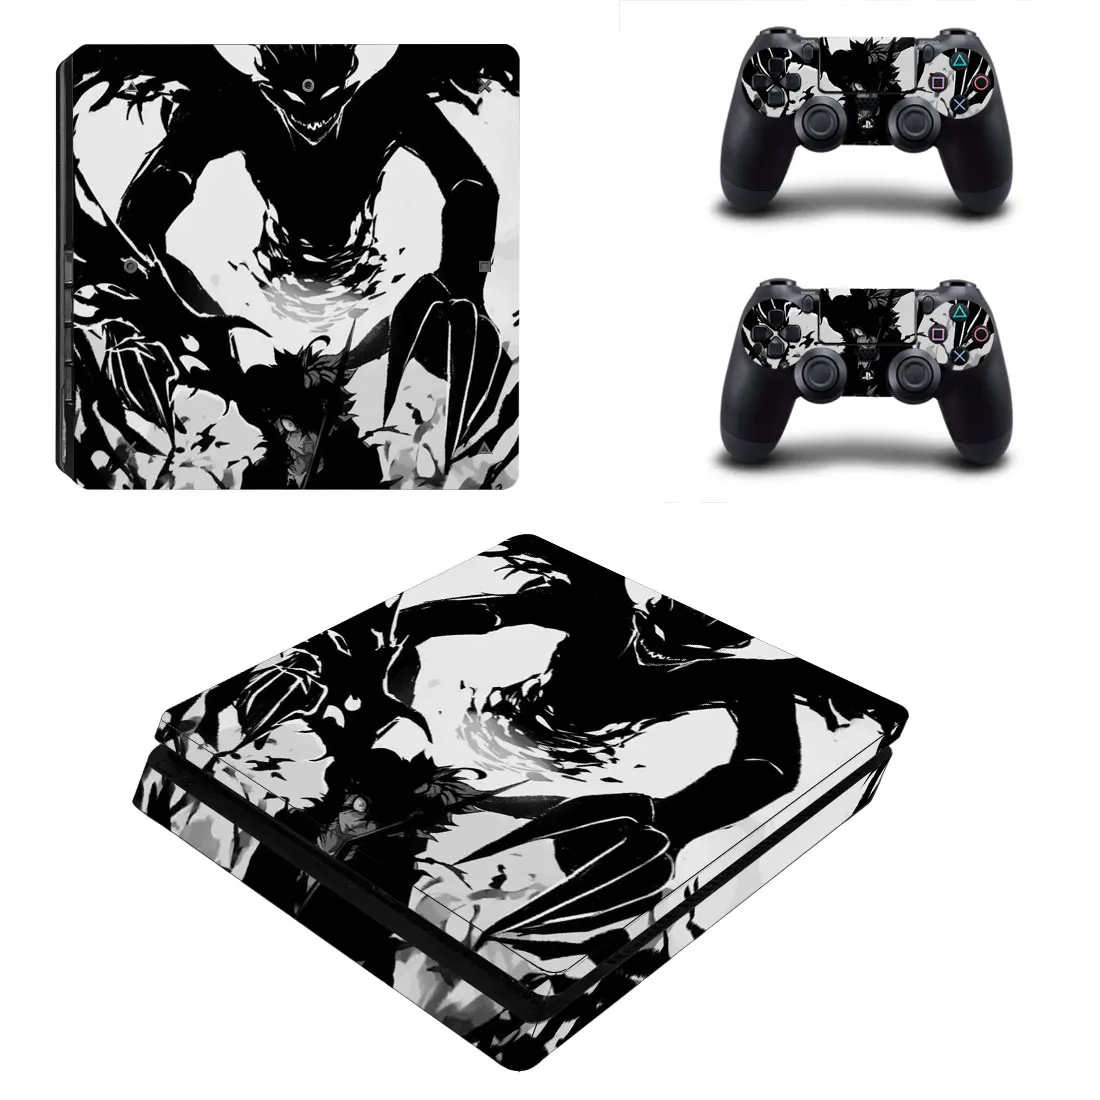 

Black Clover PS4 Slim Skin Sticker For Sony PlayStation 4 Console and Controllers PS4 Slim Skins Sticker Decal Vinyl